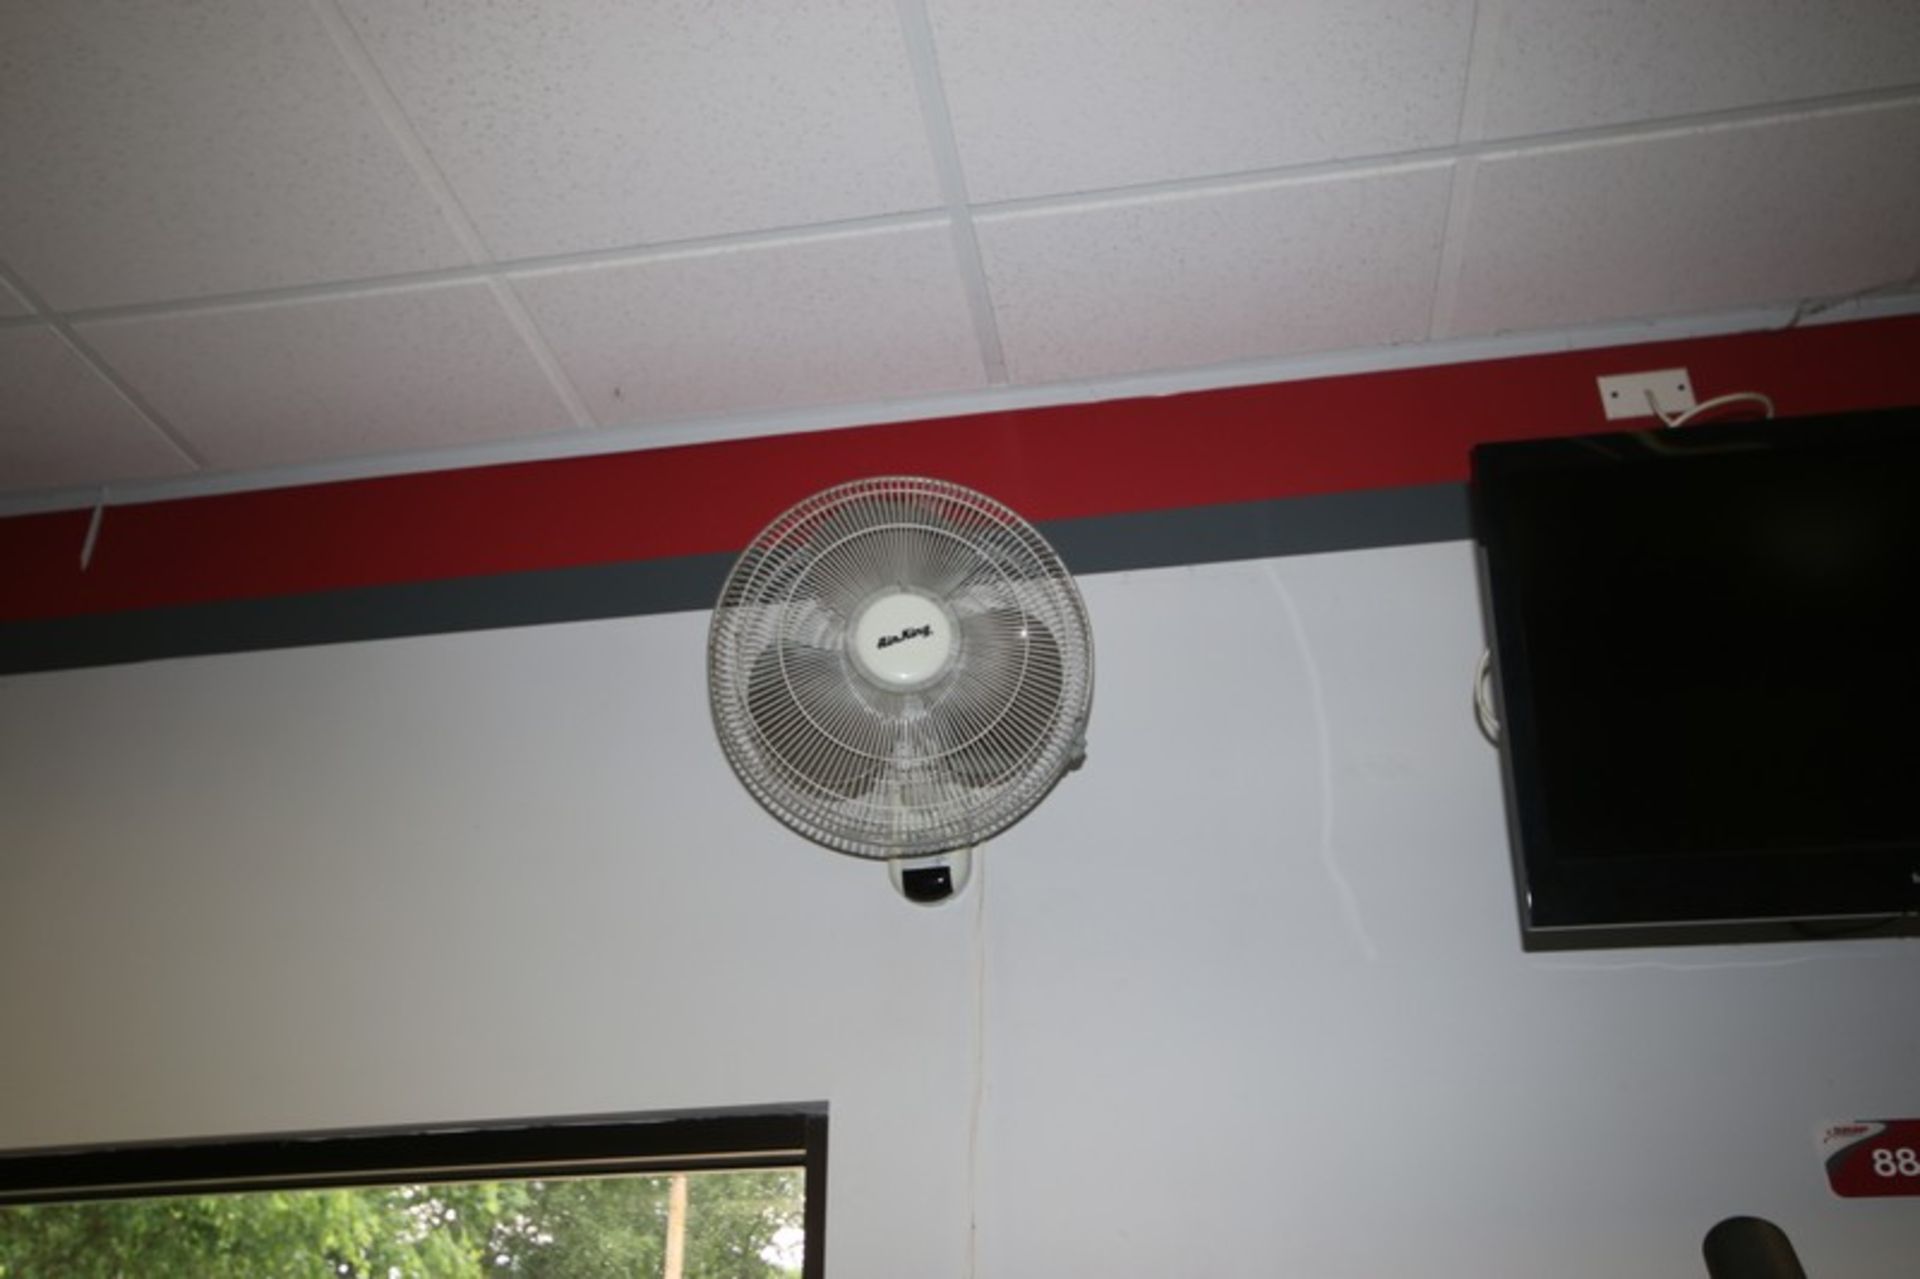 (3) Air King Wall Mounted Fans (LOCATED @ 2800 GOLDEN MILE HWY, ROUTE 286, PITTSBURGH, PA 15239) - Image 3 of 3